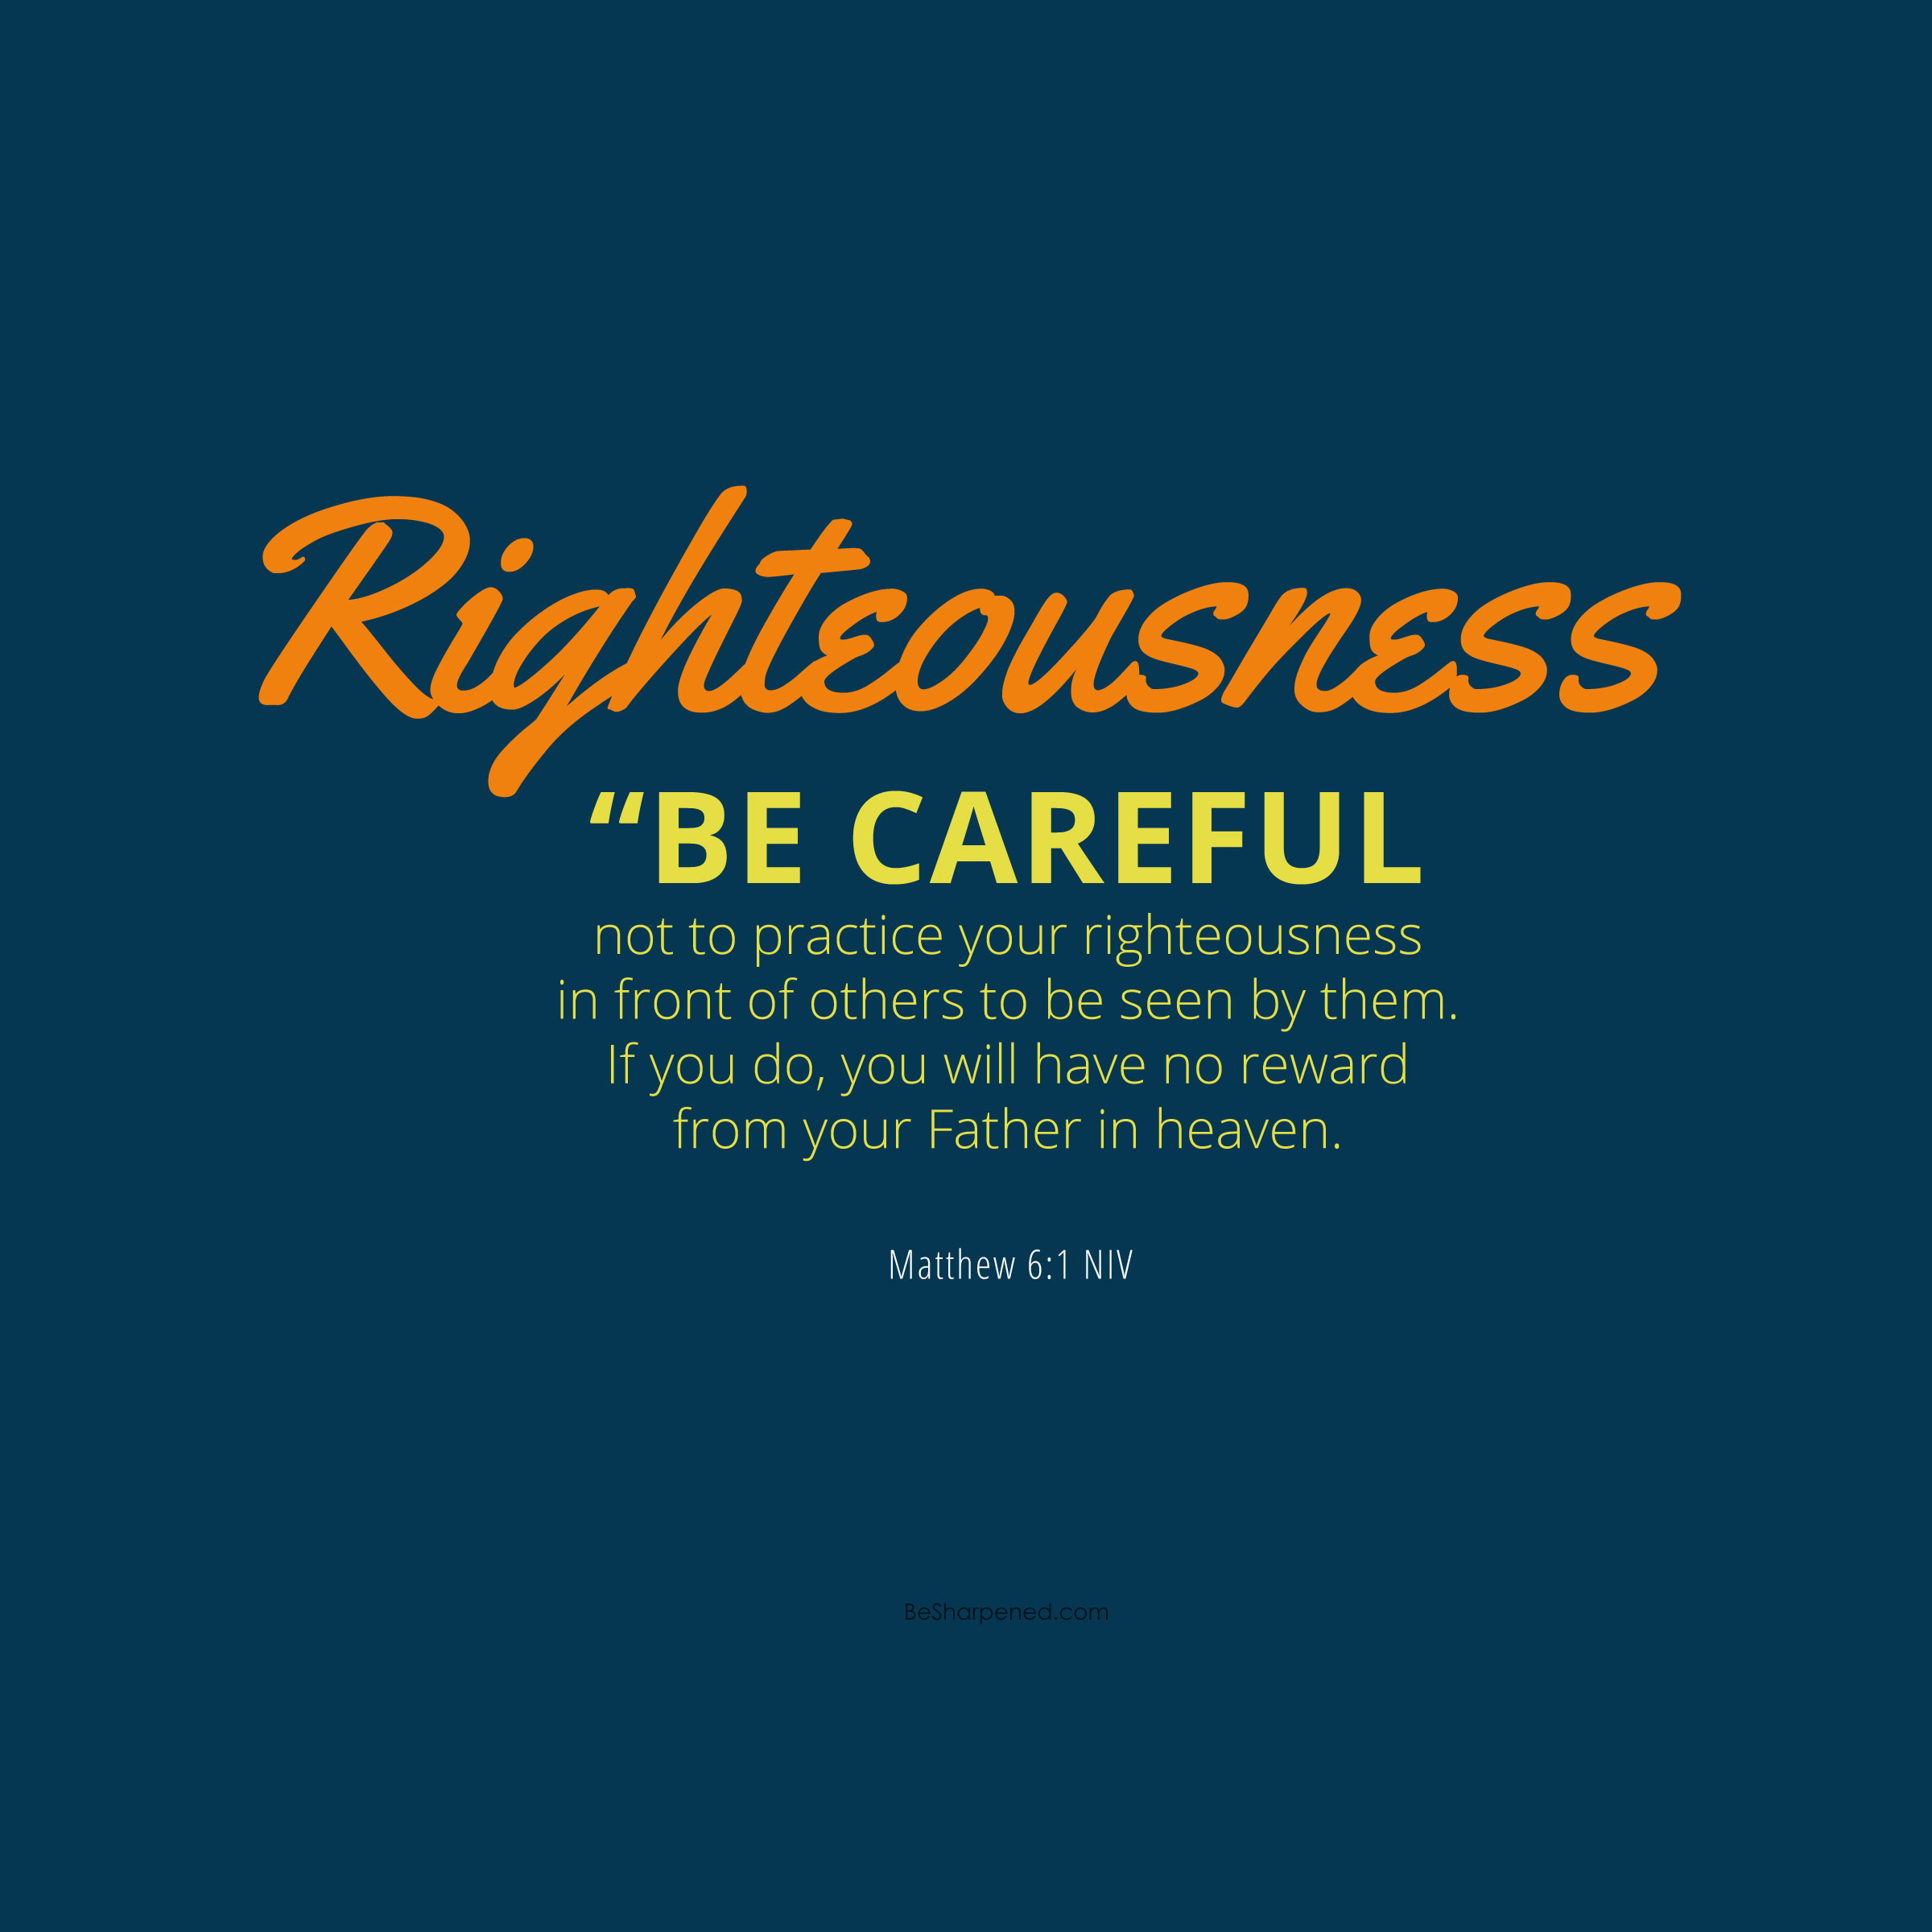 matthew 6:1 - How to Practice Your Righteousness